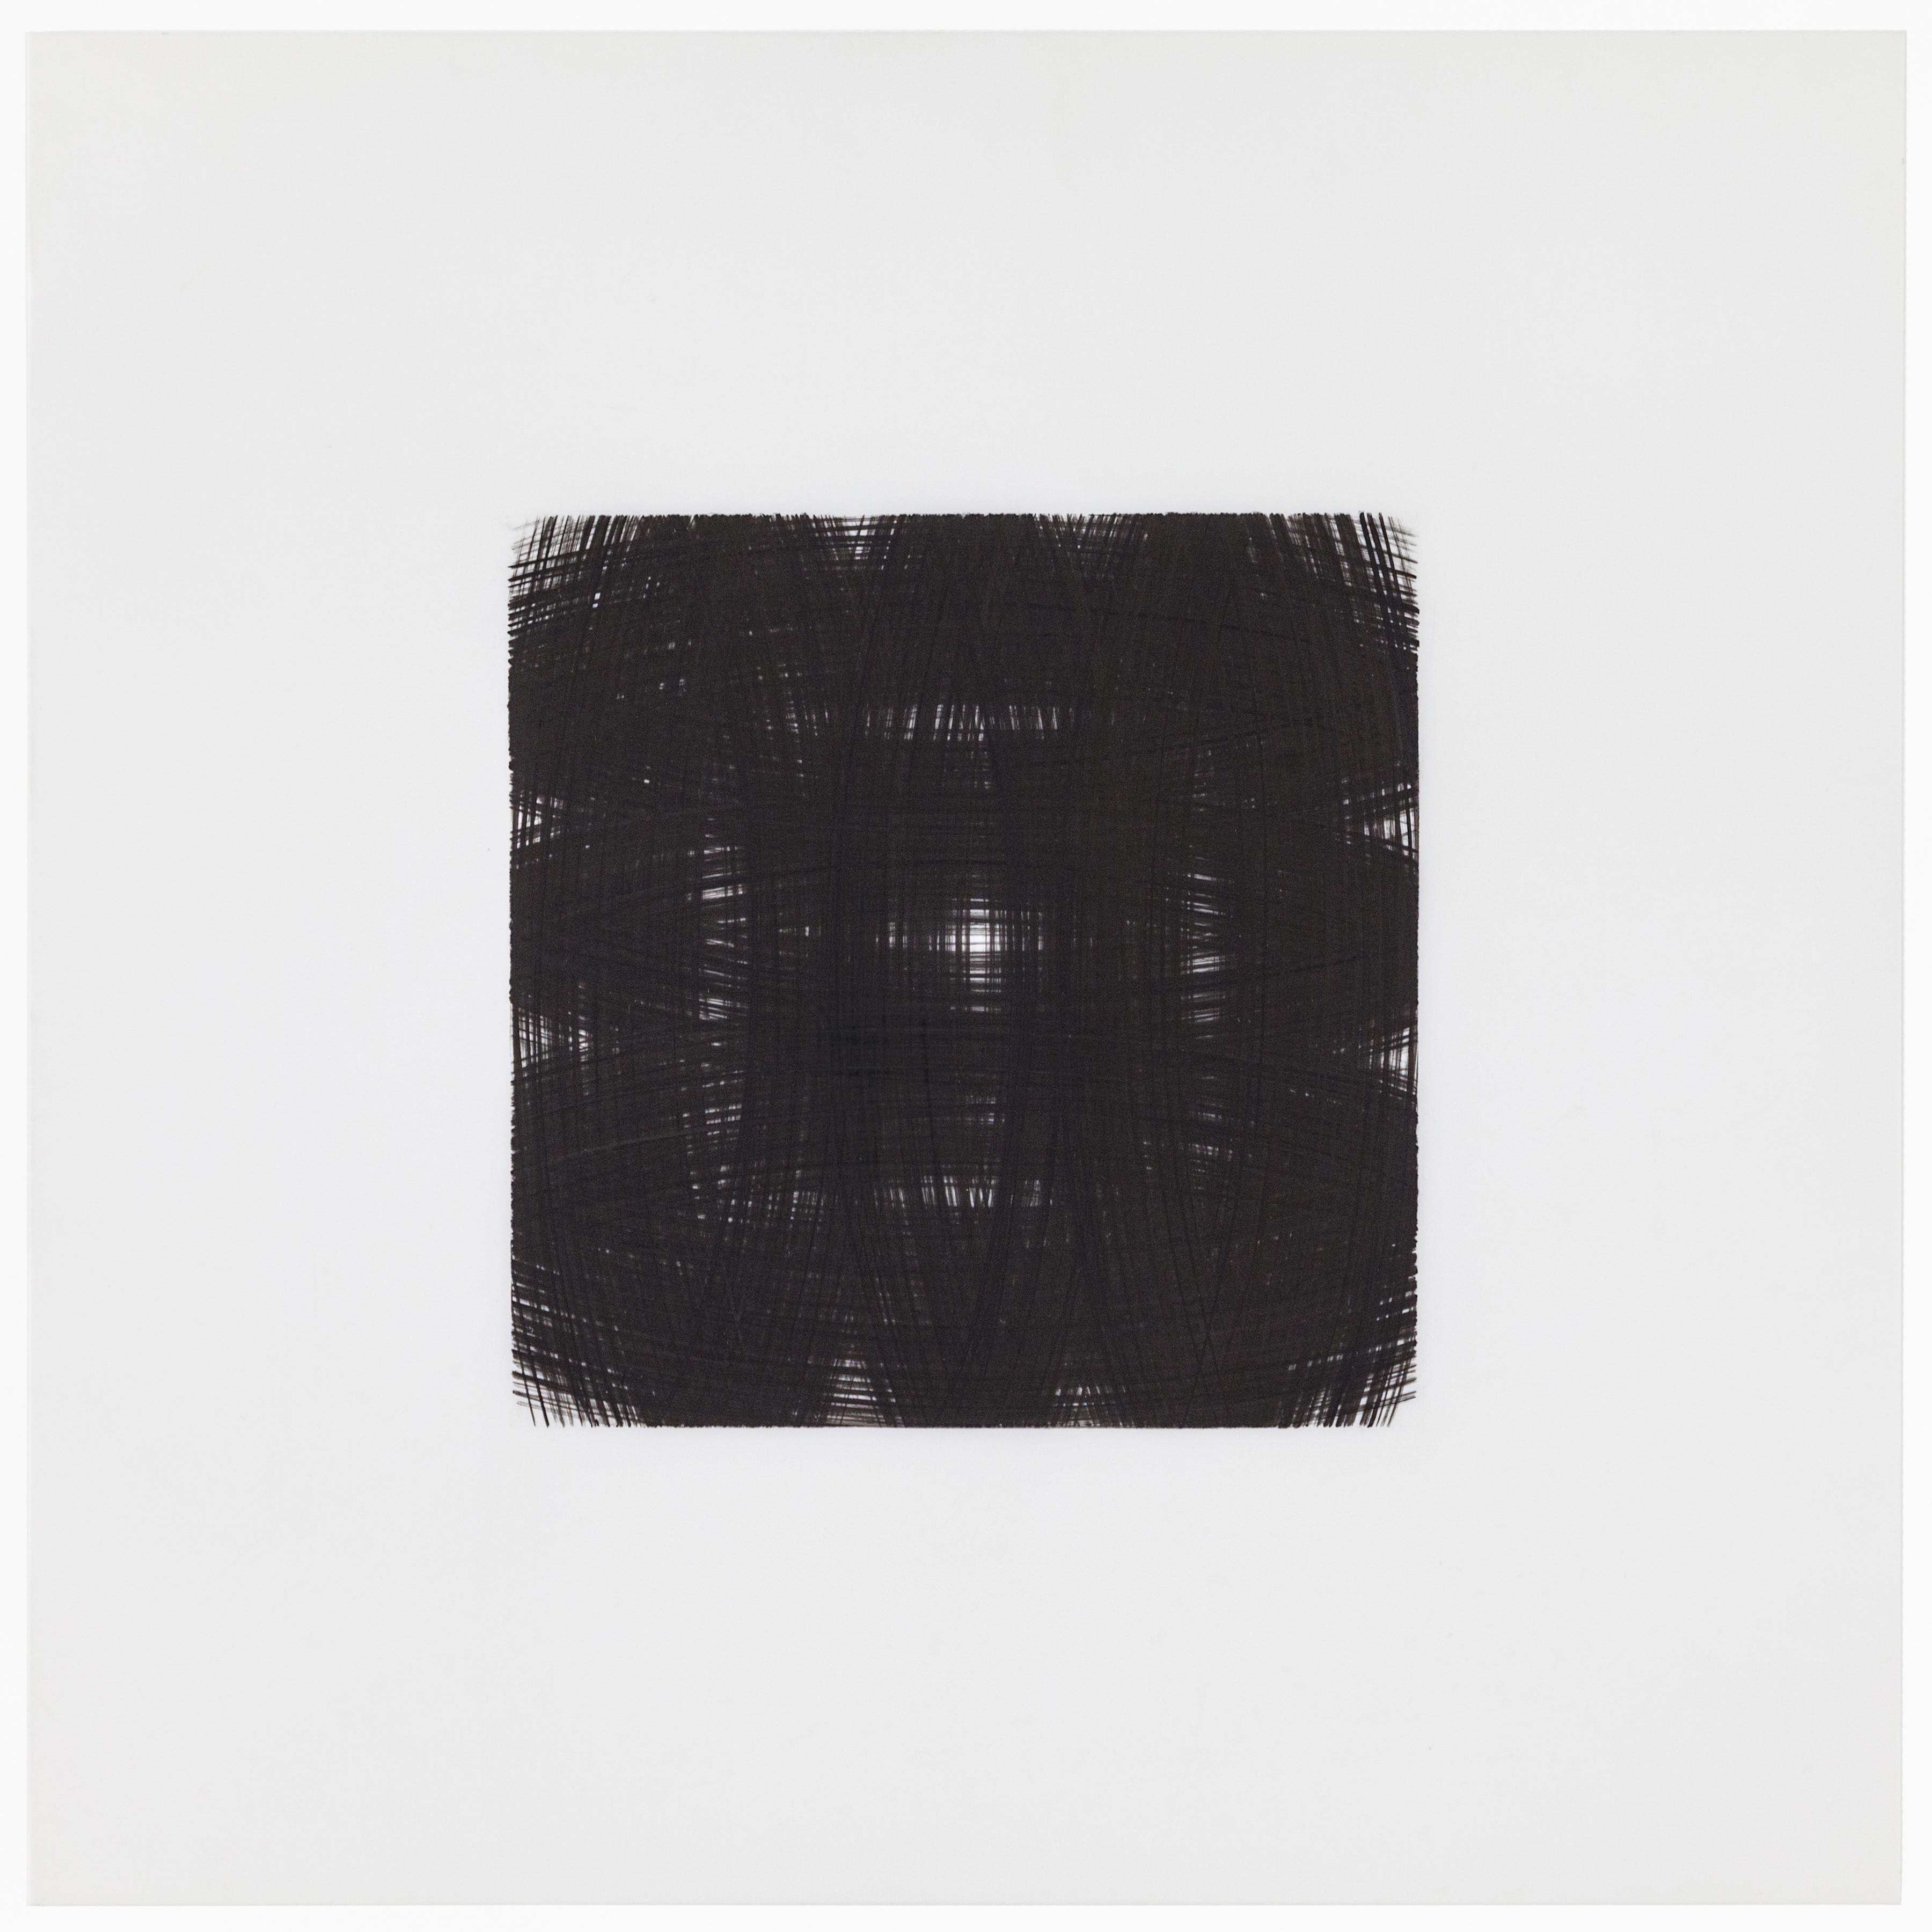 Patrick Carrara Black Ink on Mylar Drawings, Appearance Series, 2013 - 2015 In Excellent Condition For Sale In New York, NY